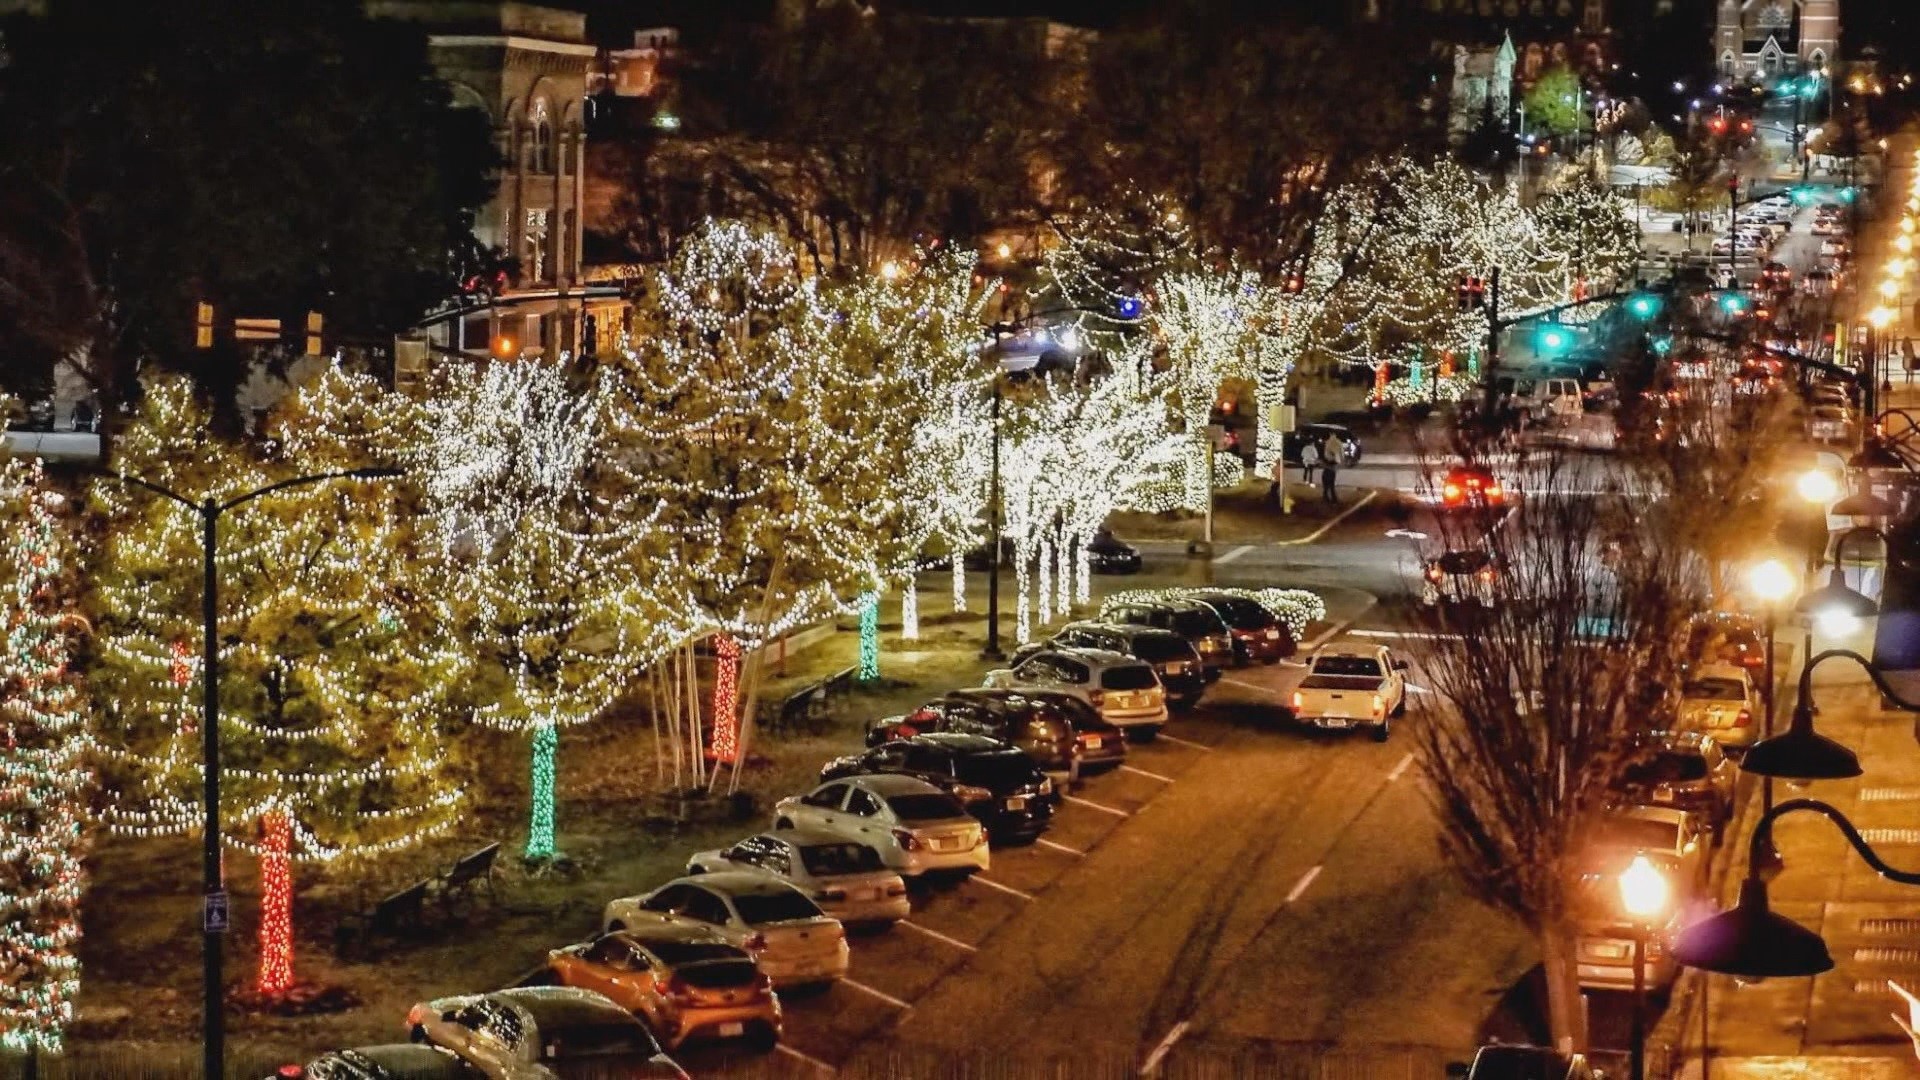 Macon will officially kick off the Christmas season Friday night with the Main Street Christmas Light Extravaganza.